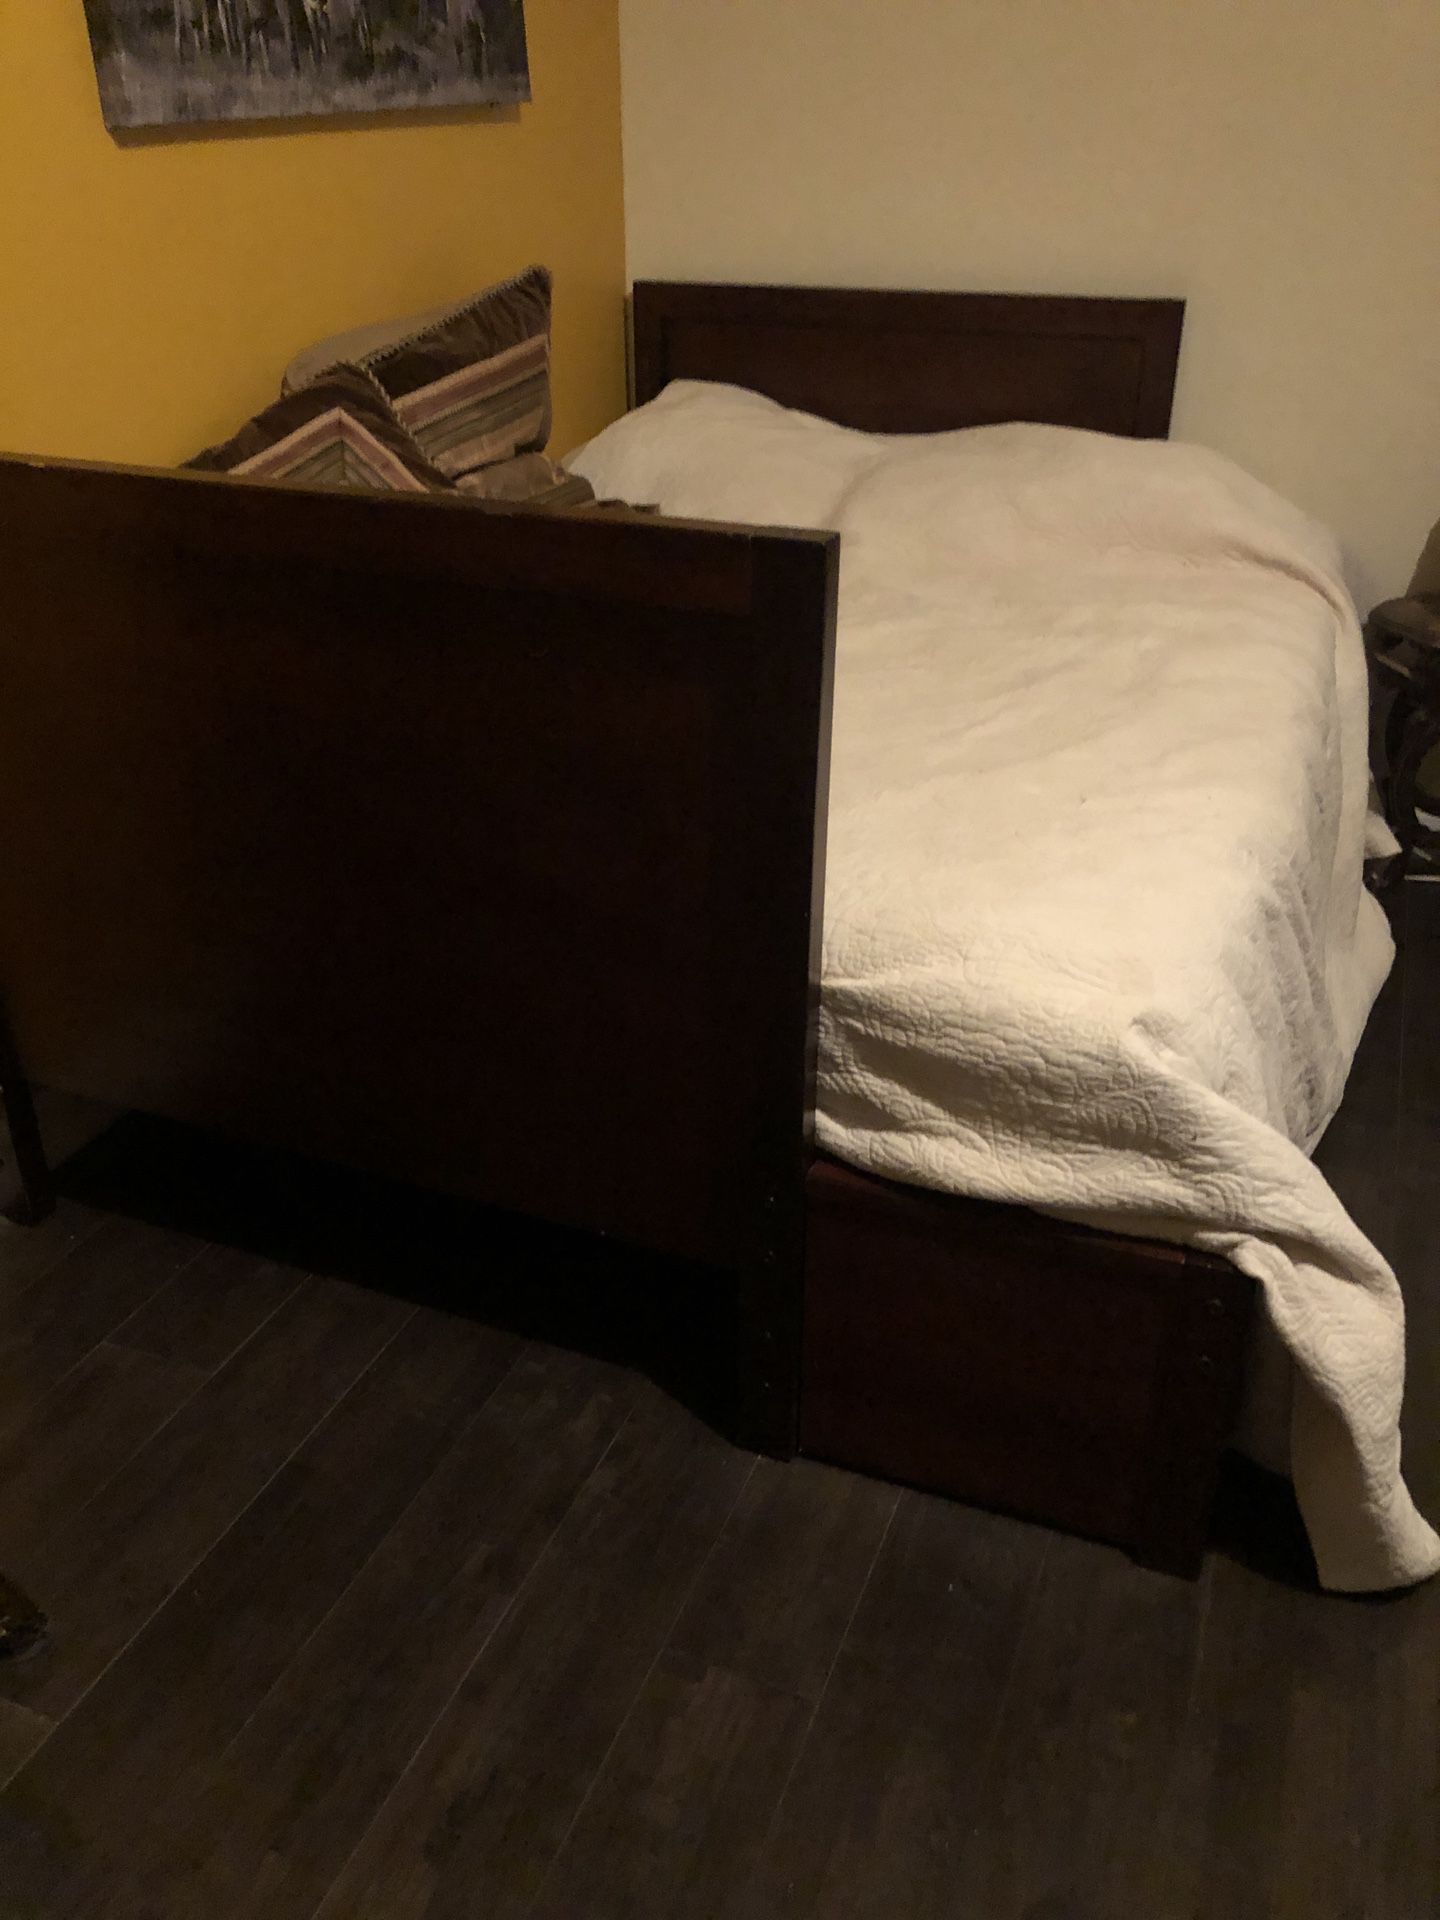 Full cherry wood full sized bed frame. No mattress. Comes apart to transport.